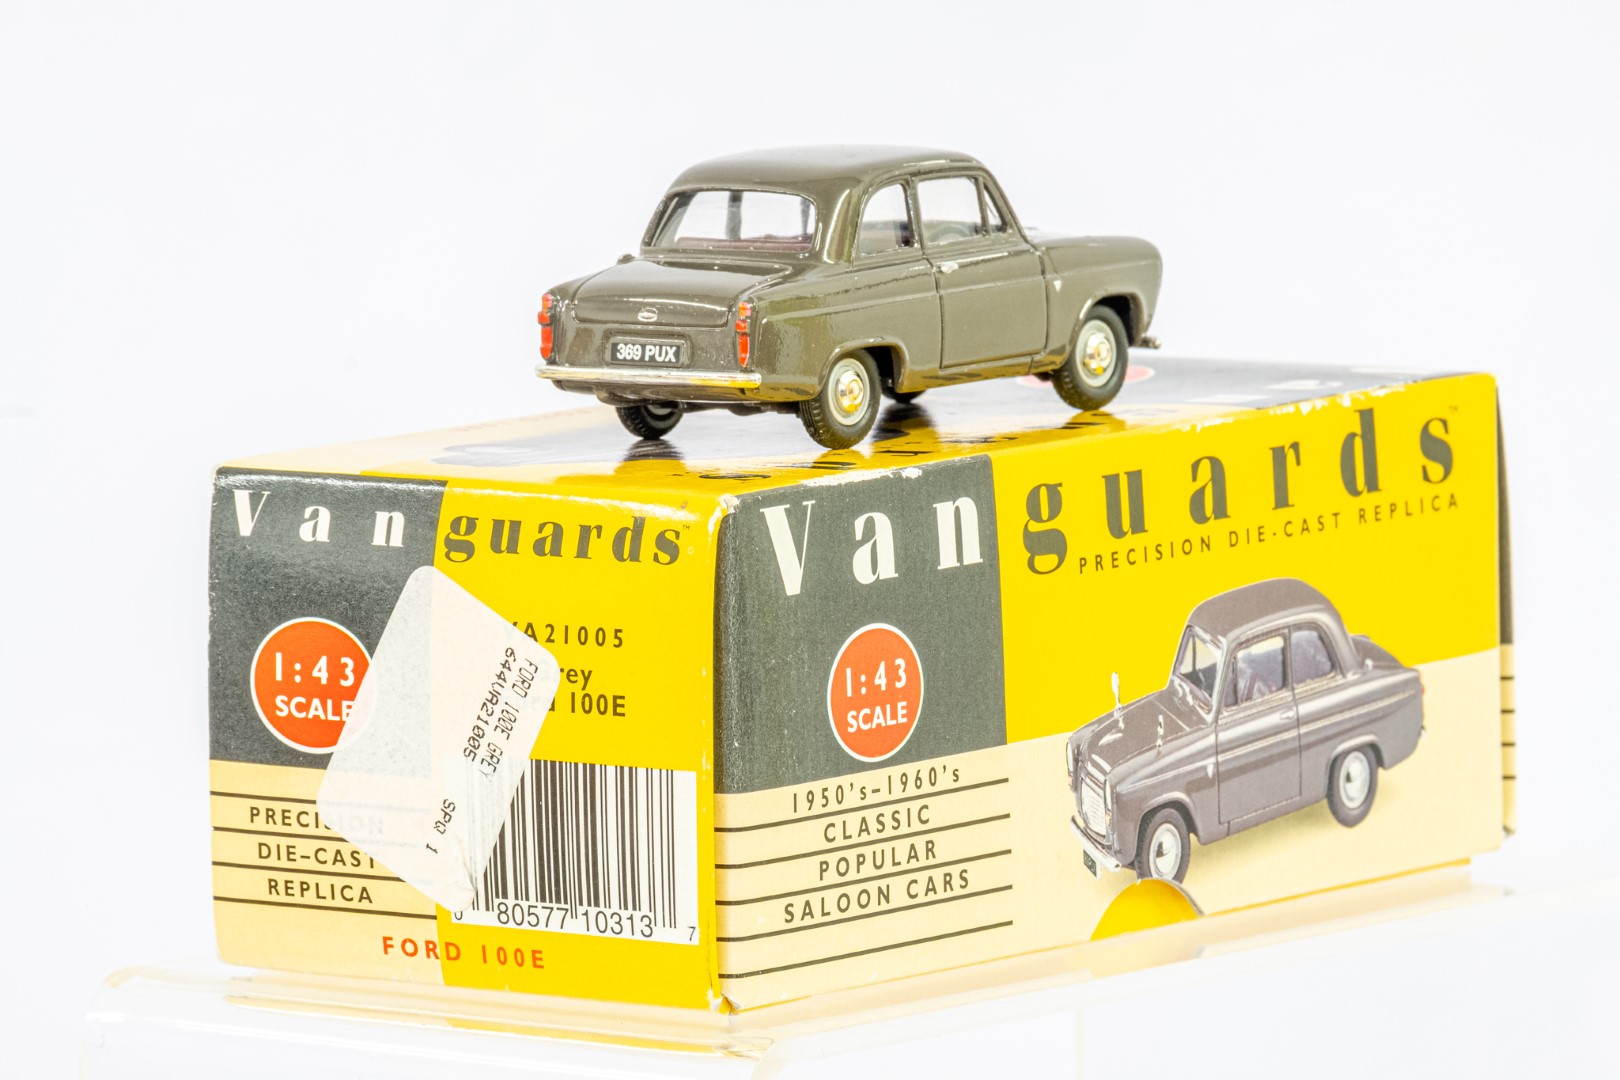 Vanguards Ford Anglia Van - London Transport / Ford 100E - Grey - Image 4 of 7